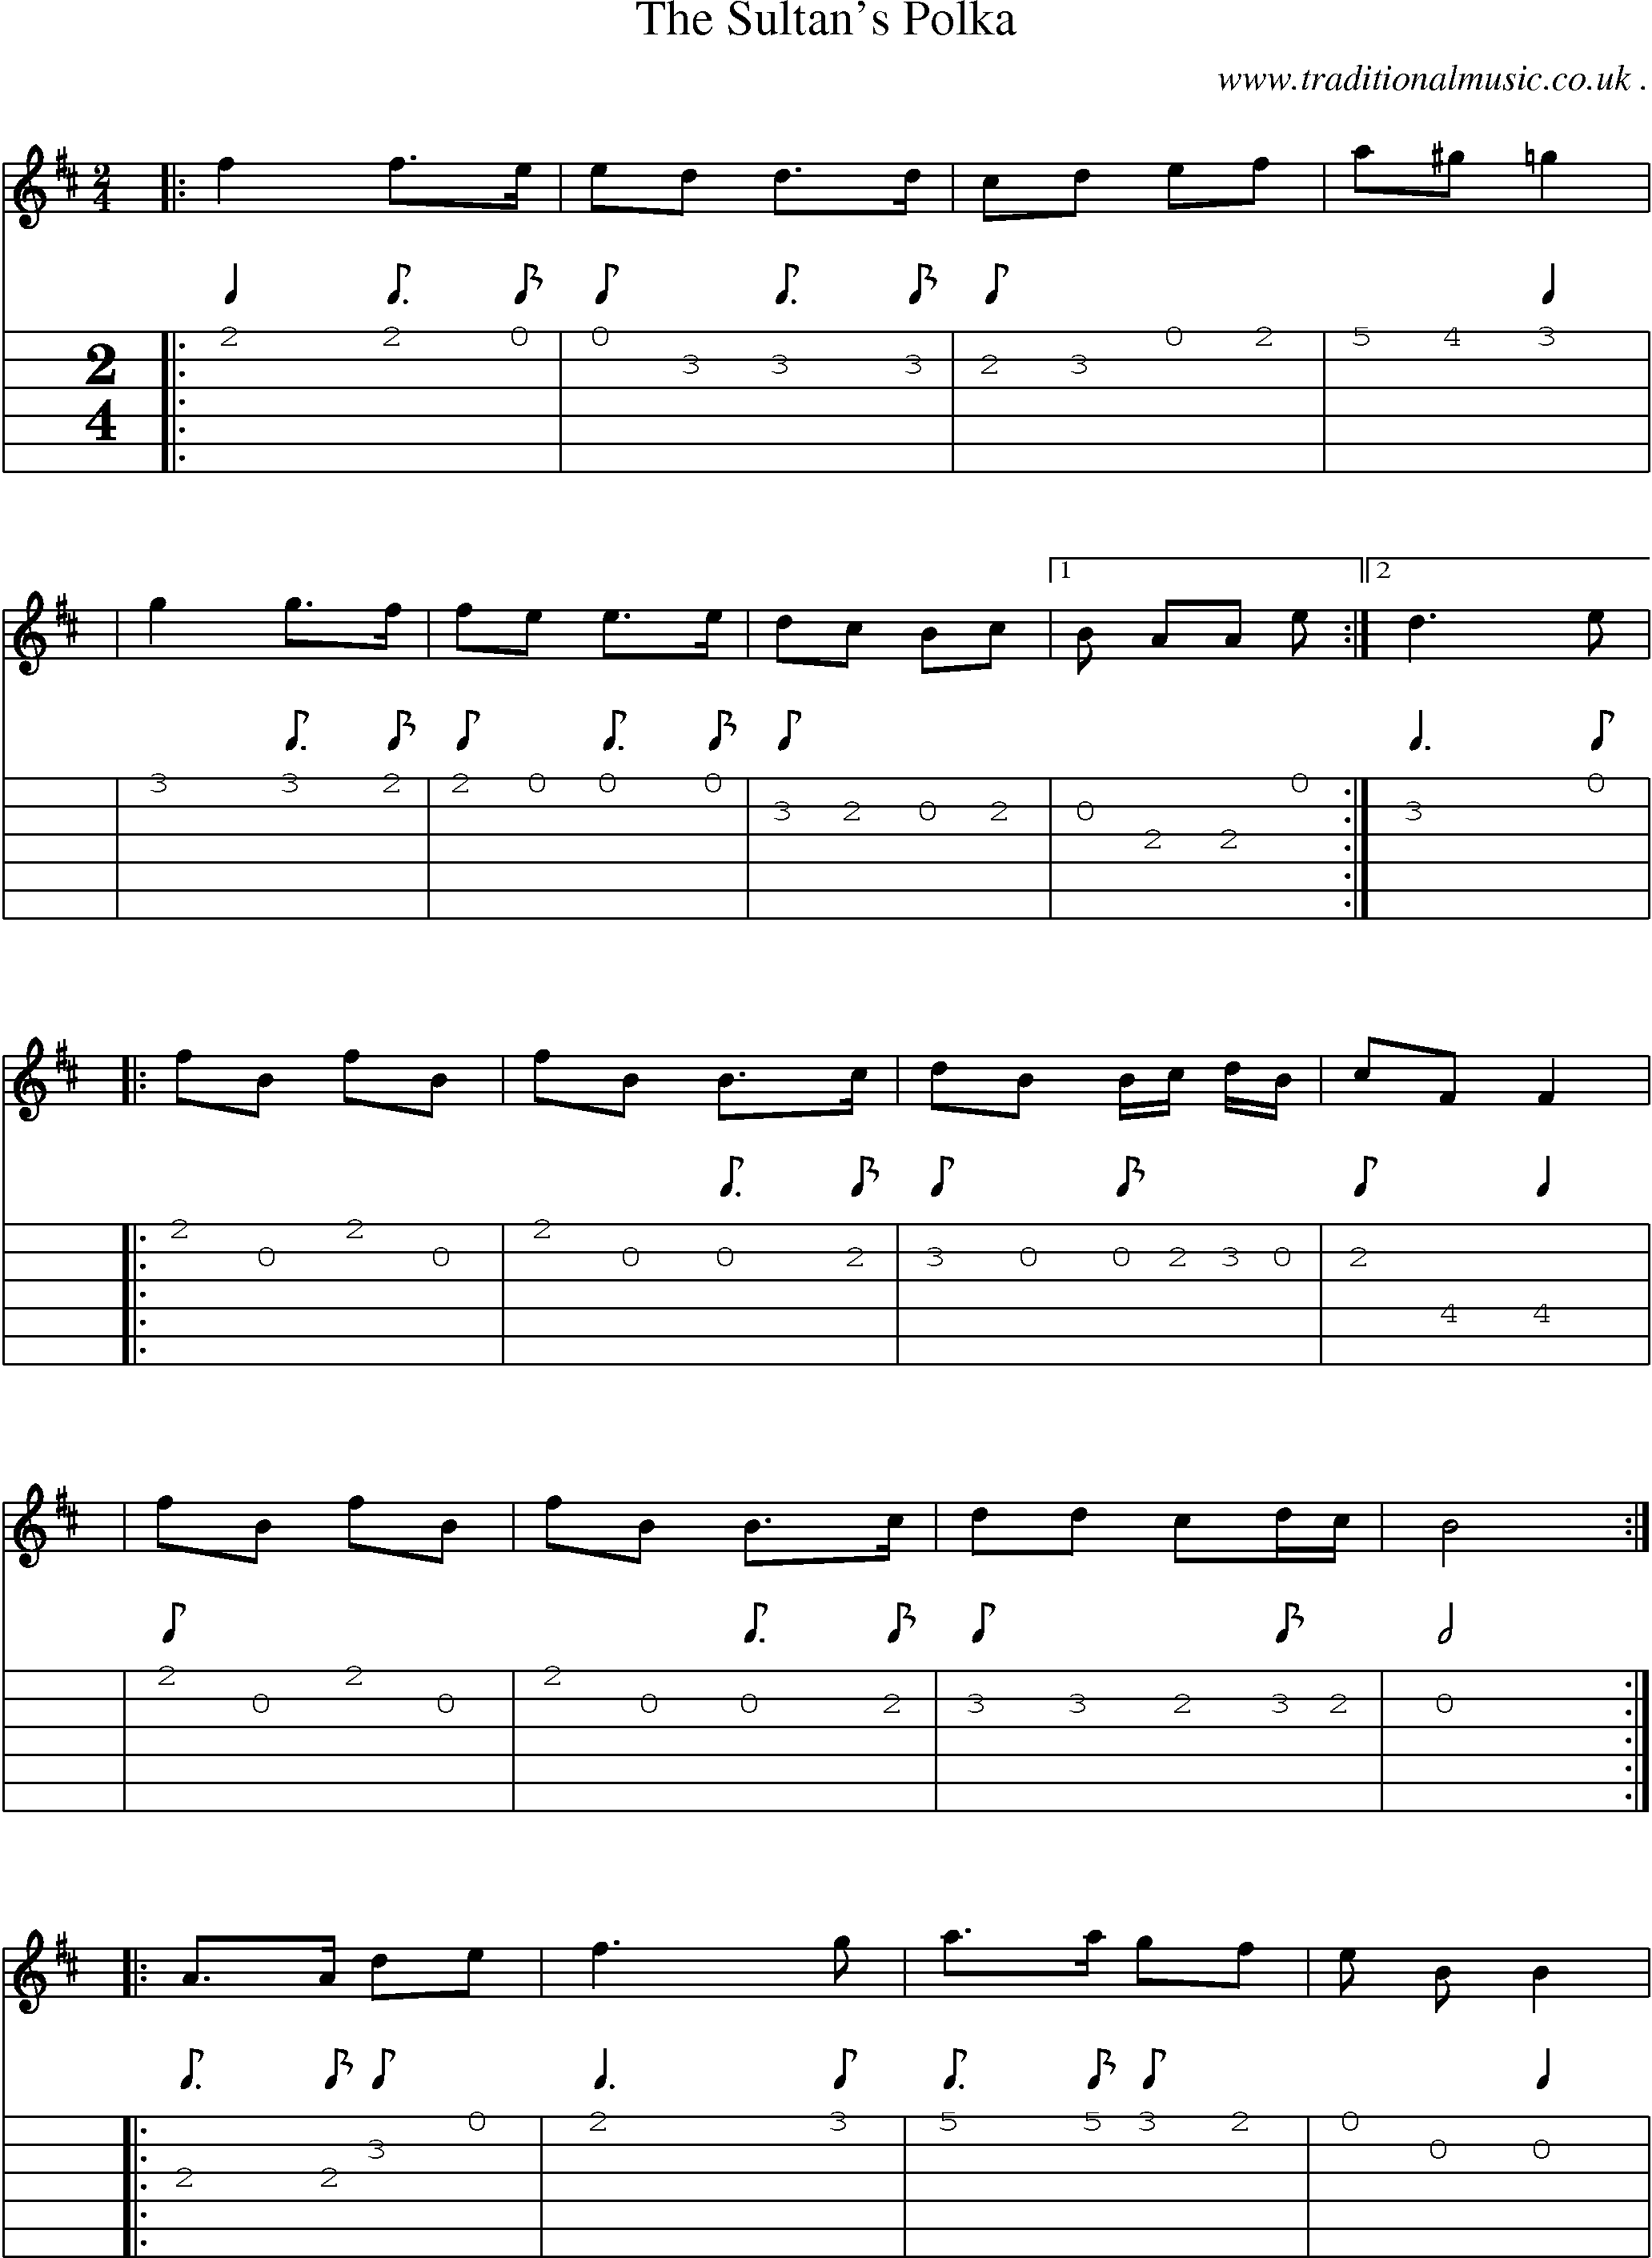 Music Score and Guitar Tabs for The Sultans Polka